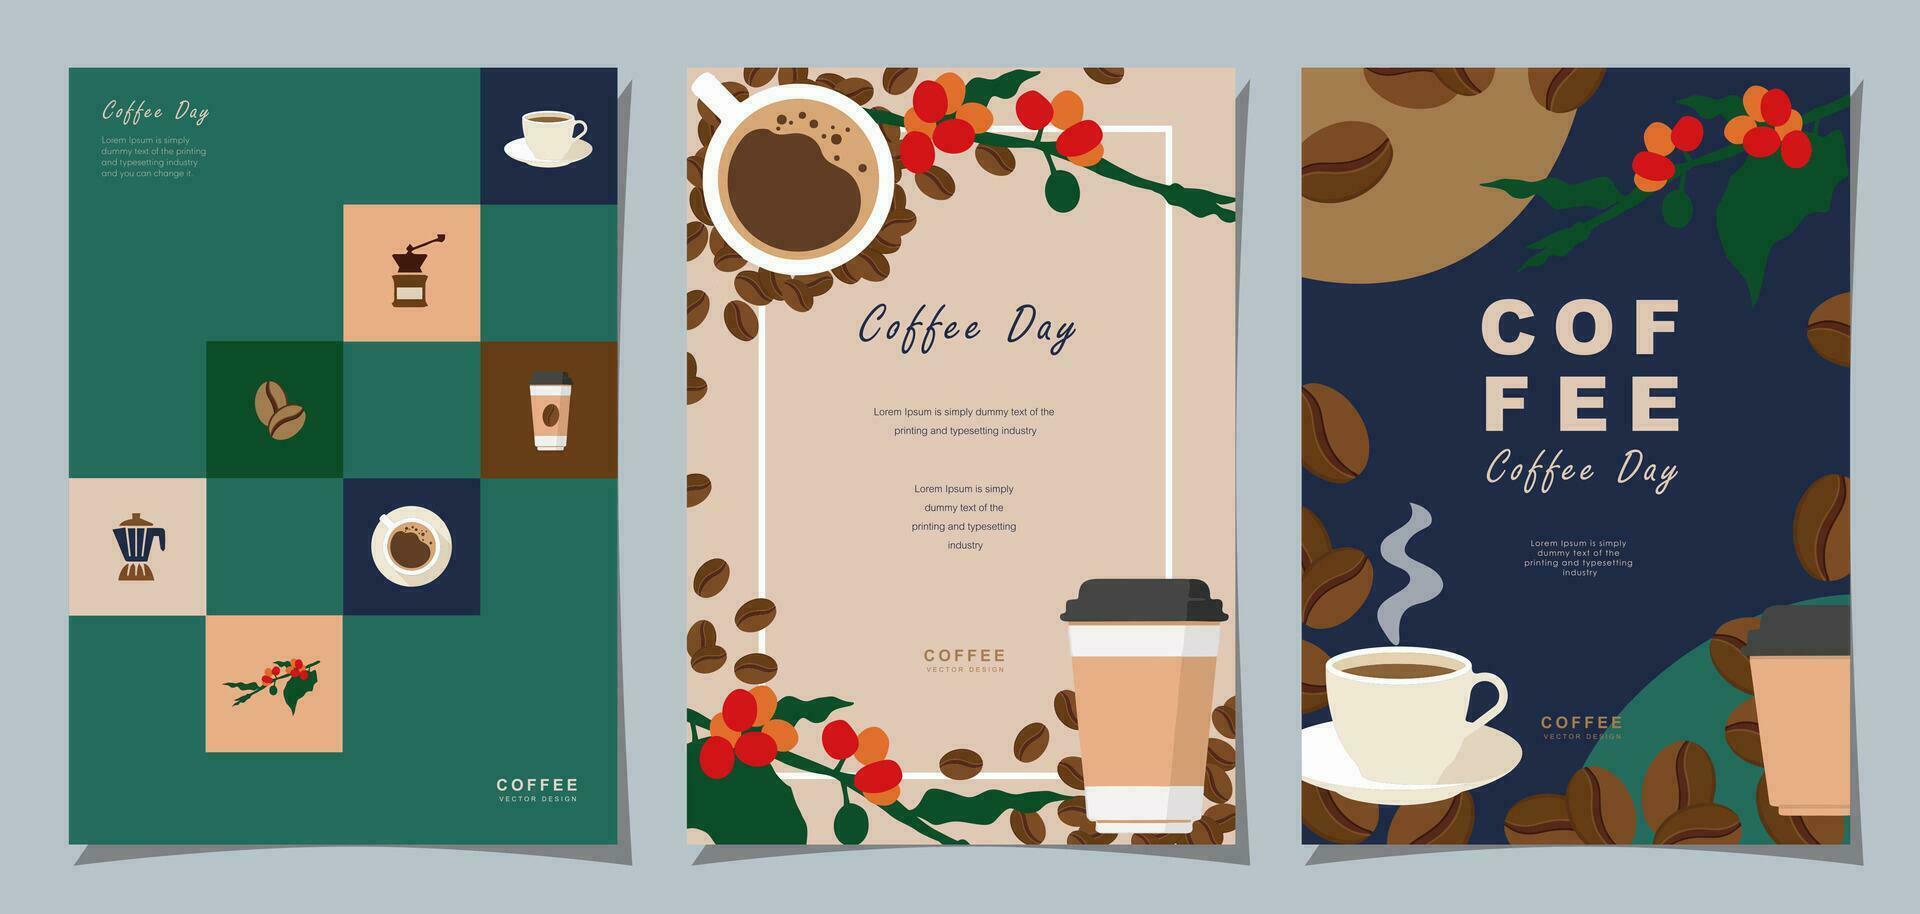 Set of Sketch banners with coffee beans and leaves on colorful background for poster or another template design. vector illustration.